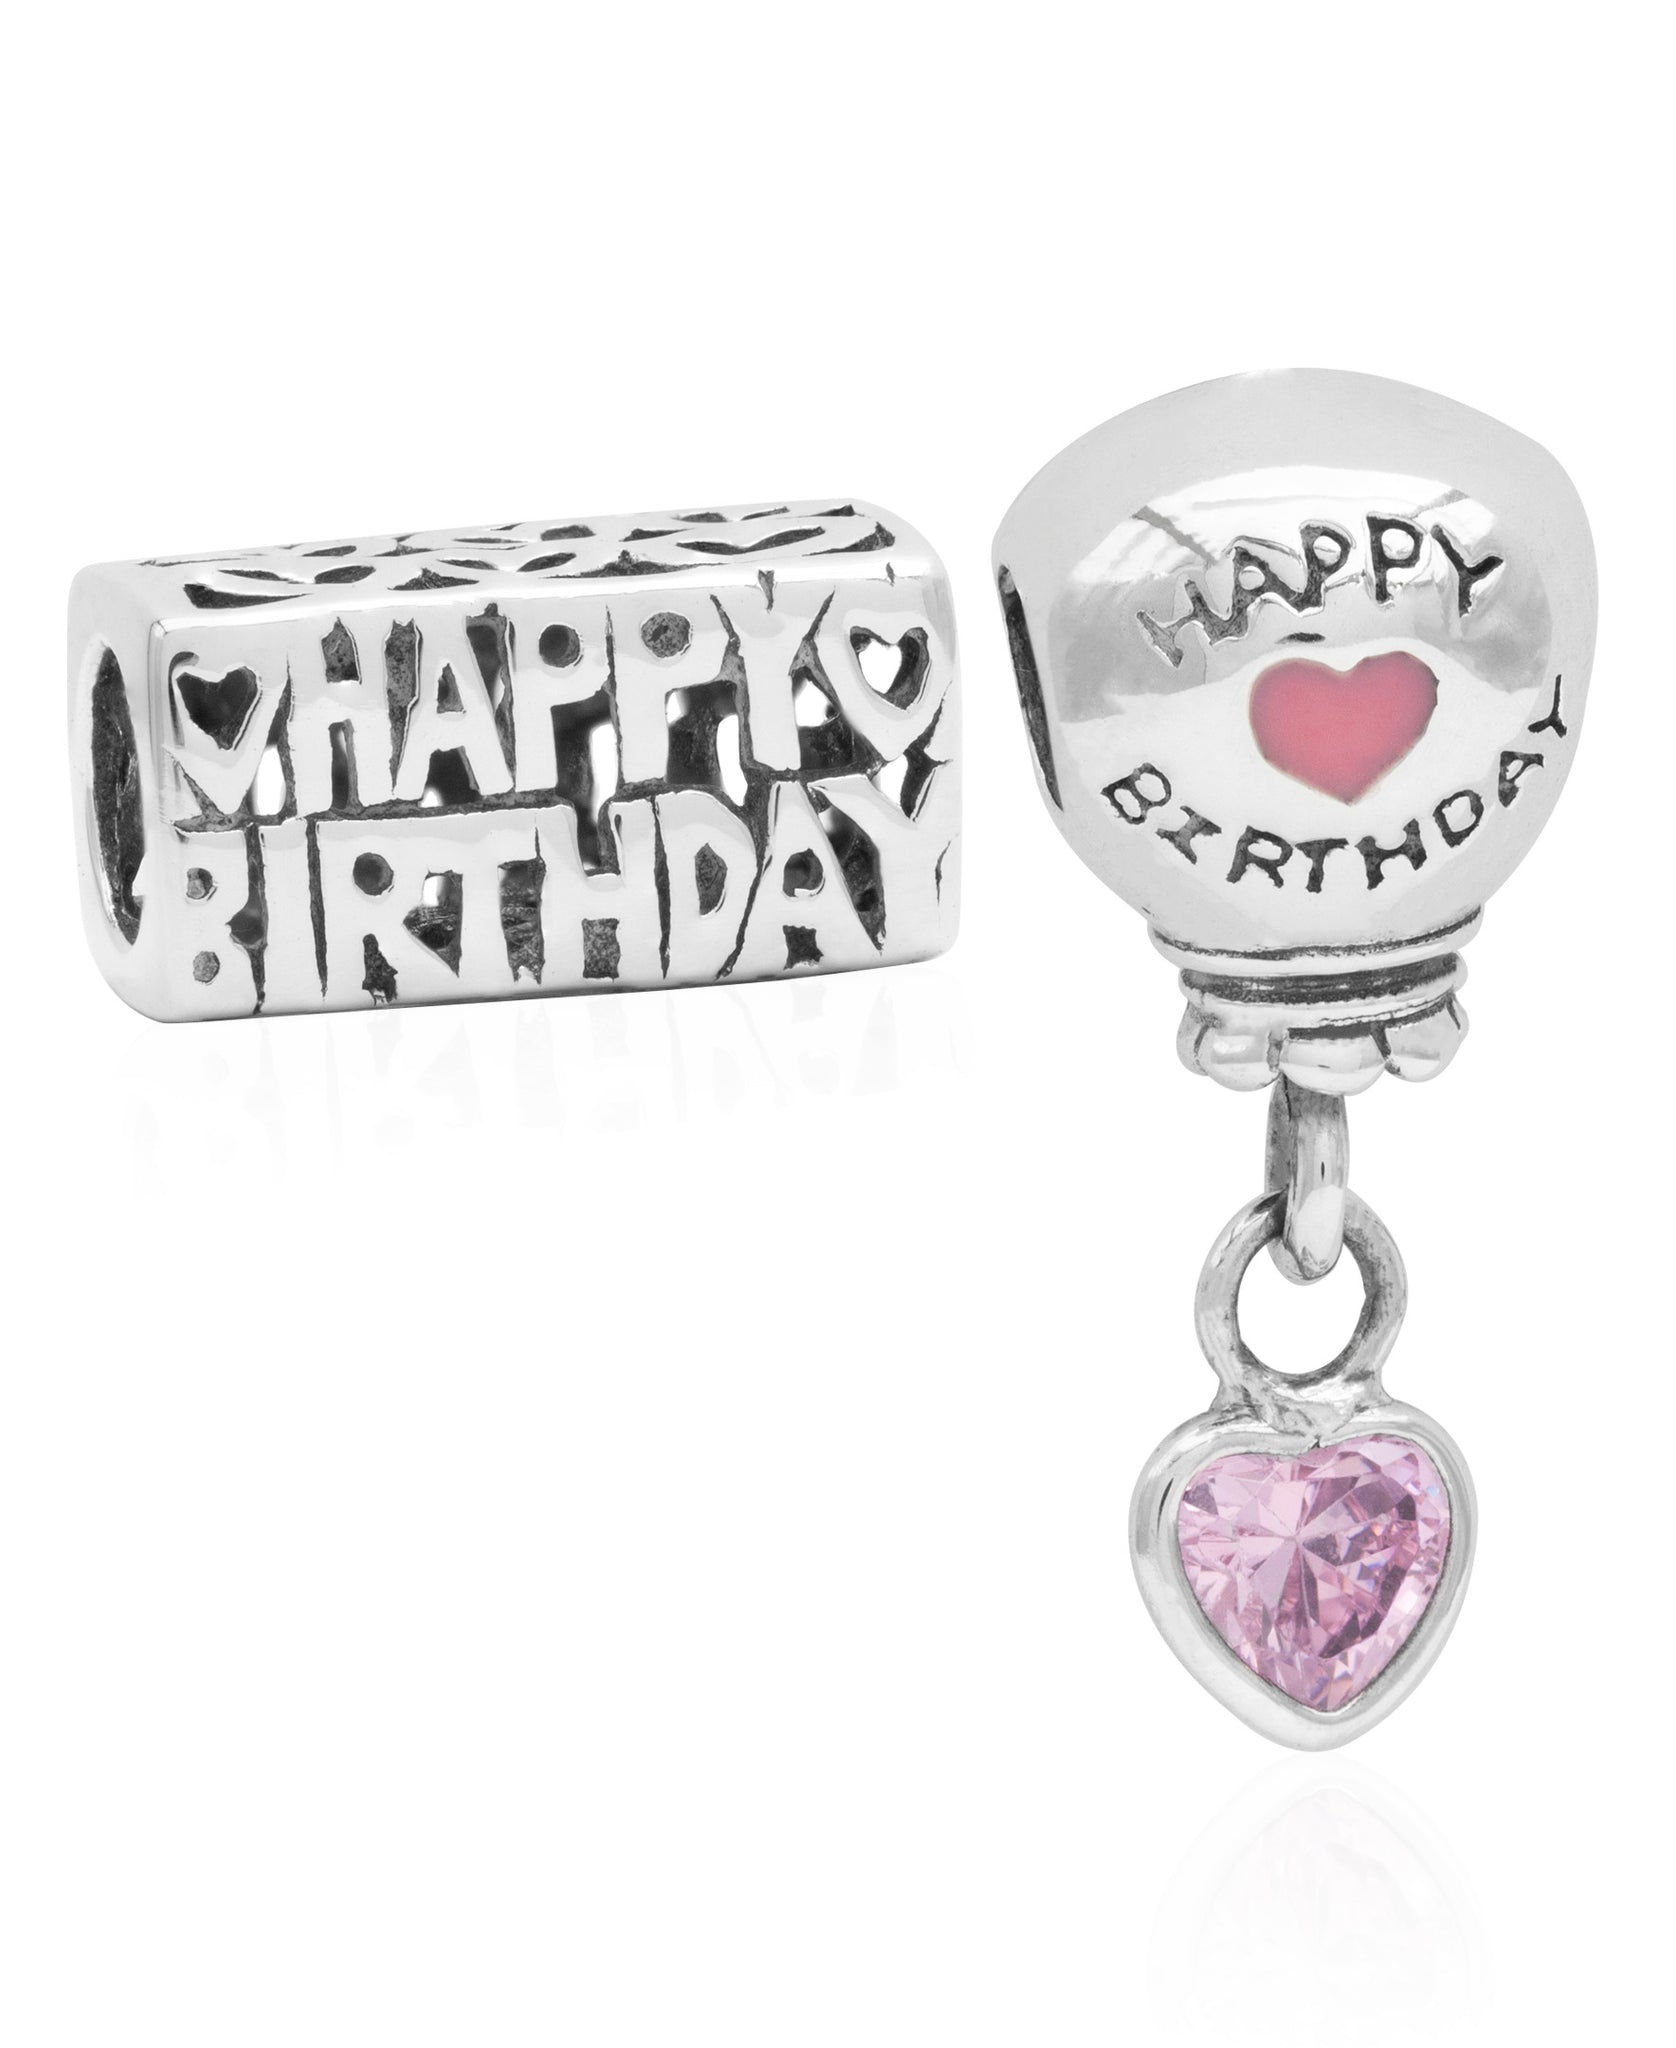 Children's Sterling Silver Happy Birthday & Balloon Bead Charms - Set of 2 - Rhona Sutton Jewellery